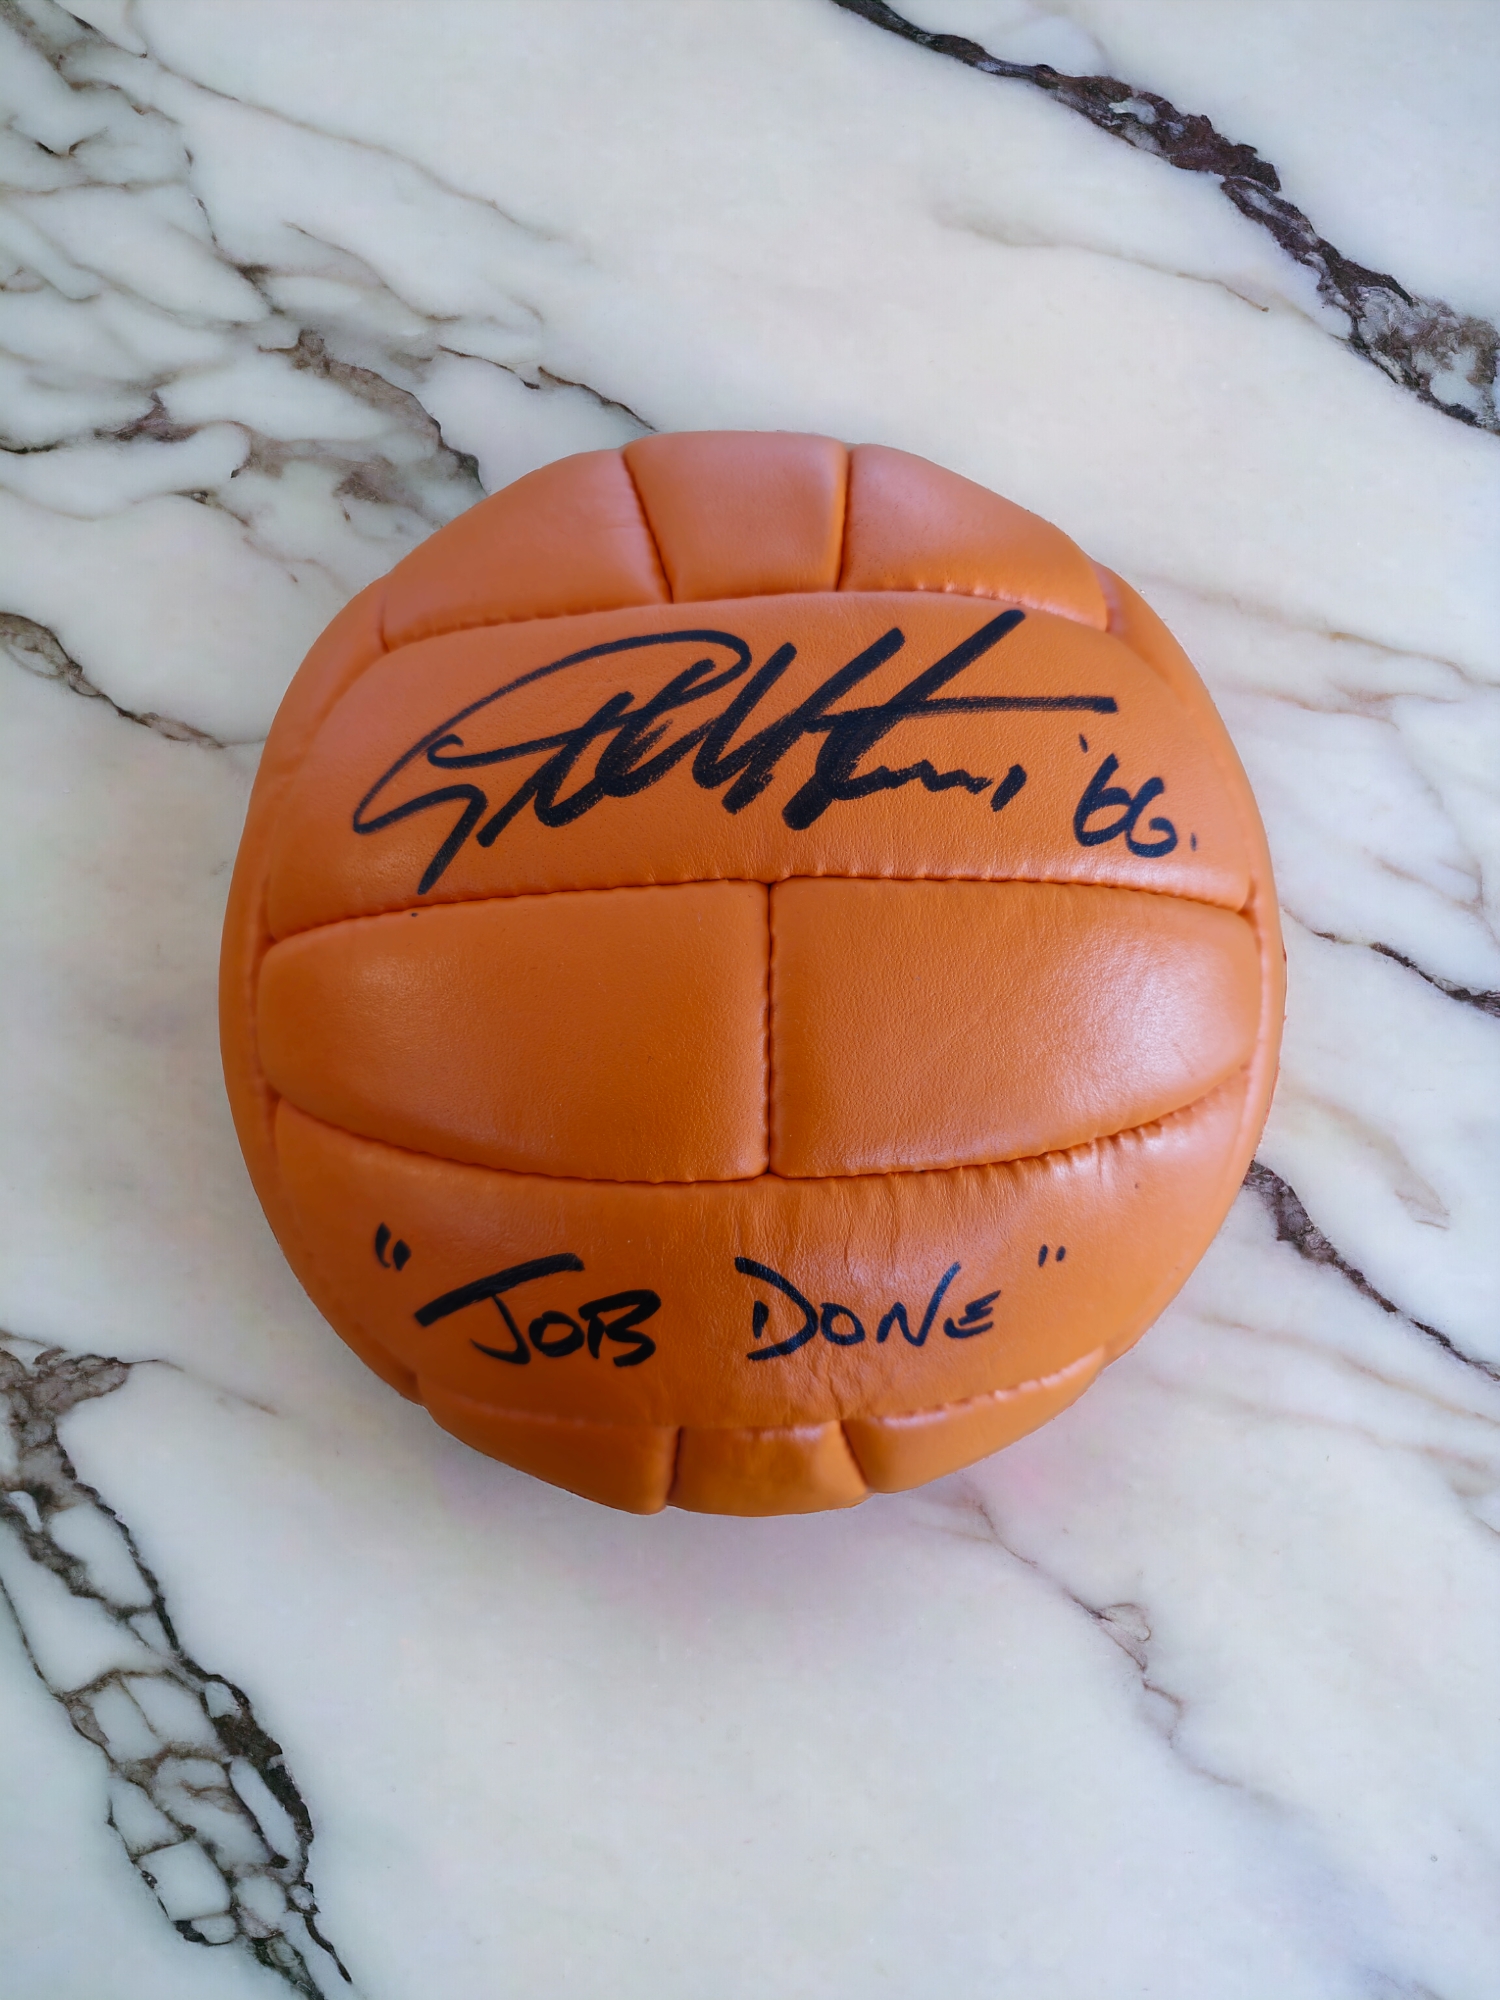 Geoff Hurst signed replica 1966 World cup final leather football inscribed "Job Done". Good